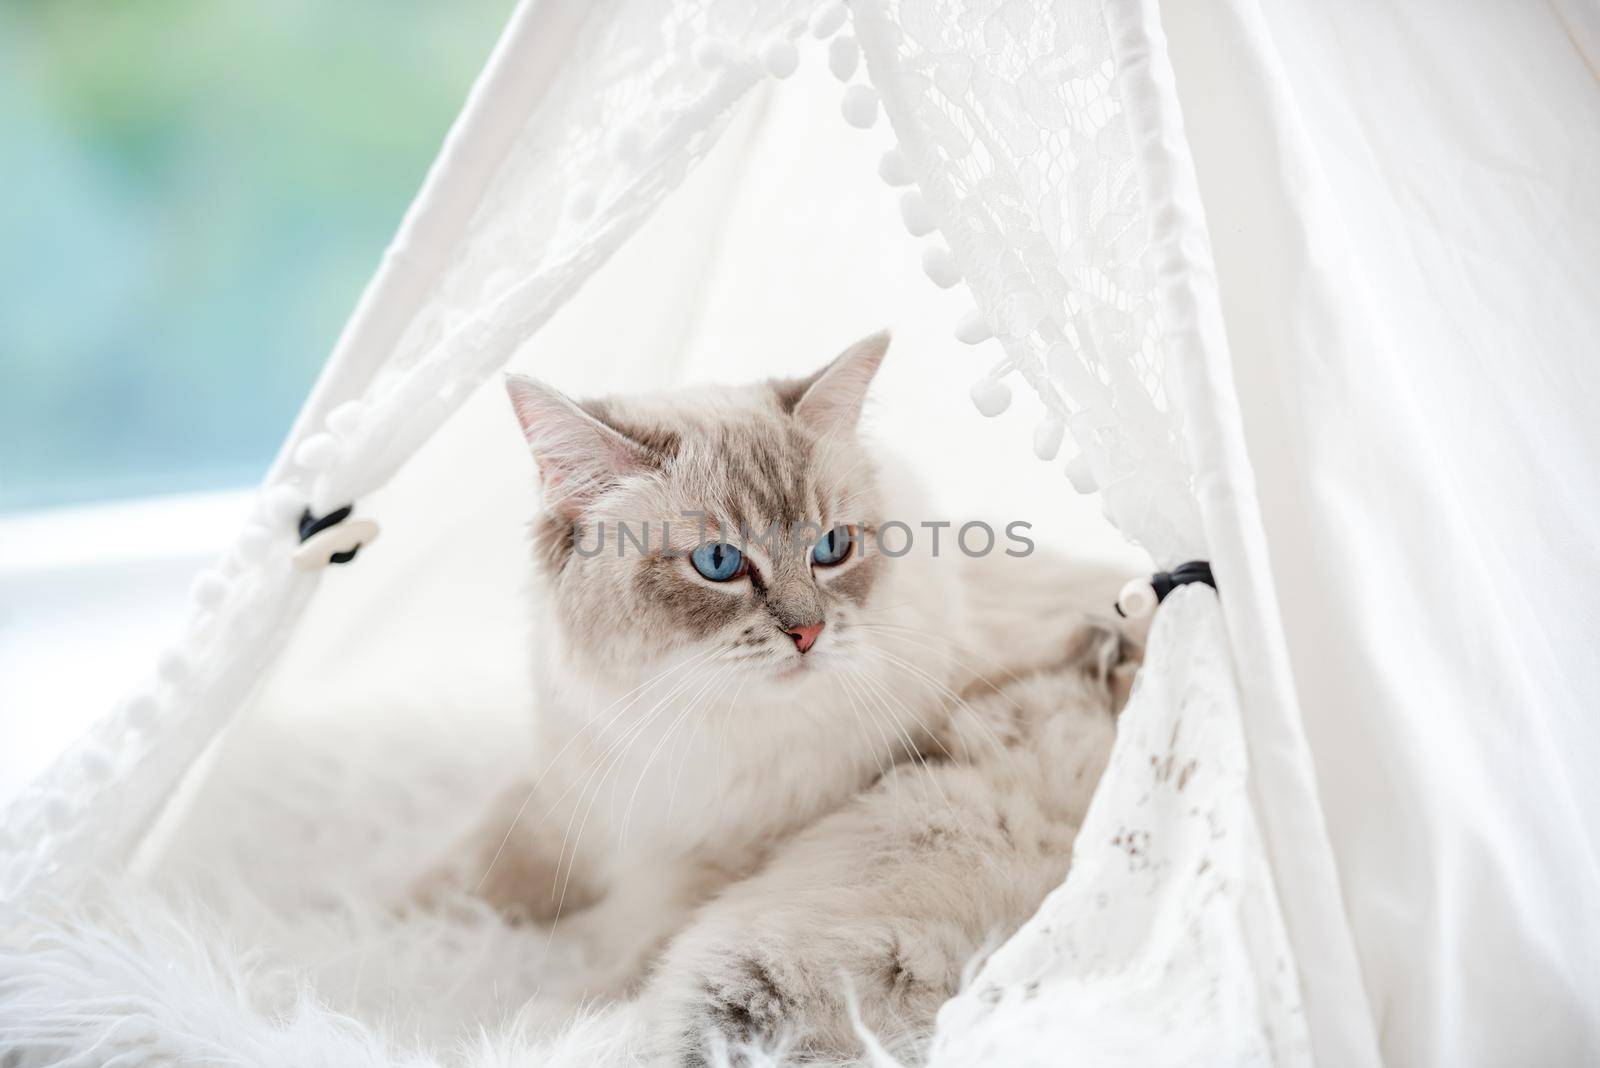 Closeup portrait of ragdol cat mother with beautiful blue eyes lying with her sleeping kittens inside white curtain tent on fur close to window. Adorable purebred feline family with kitty